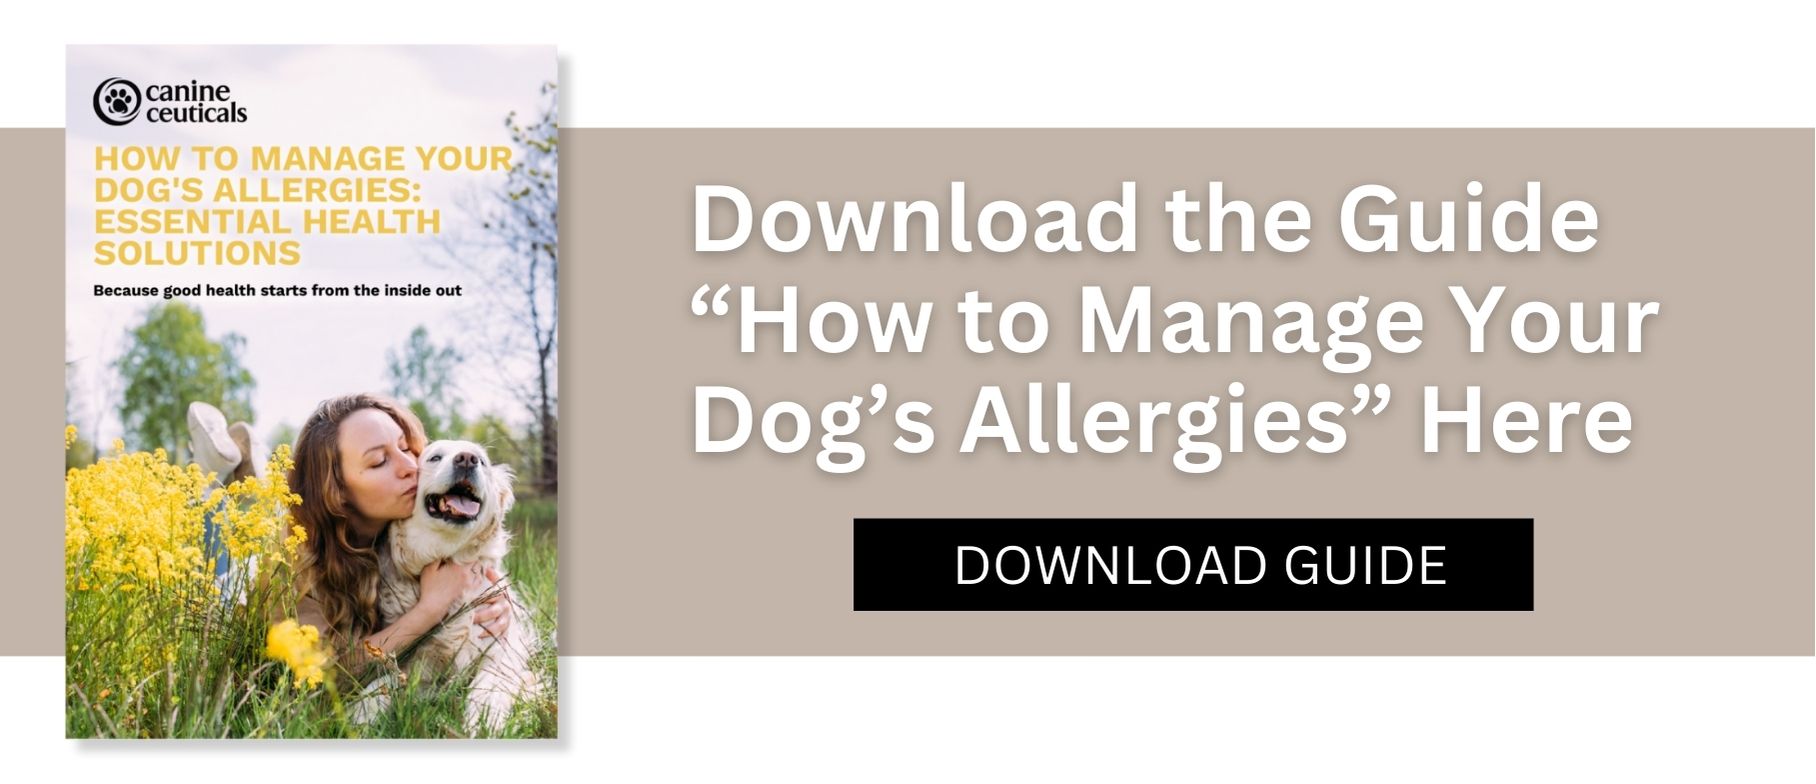 Download the guide to manage your dog's allergies